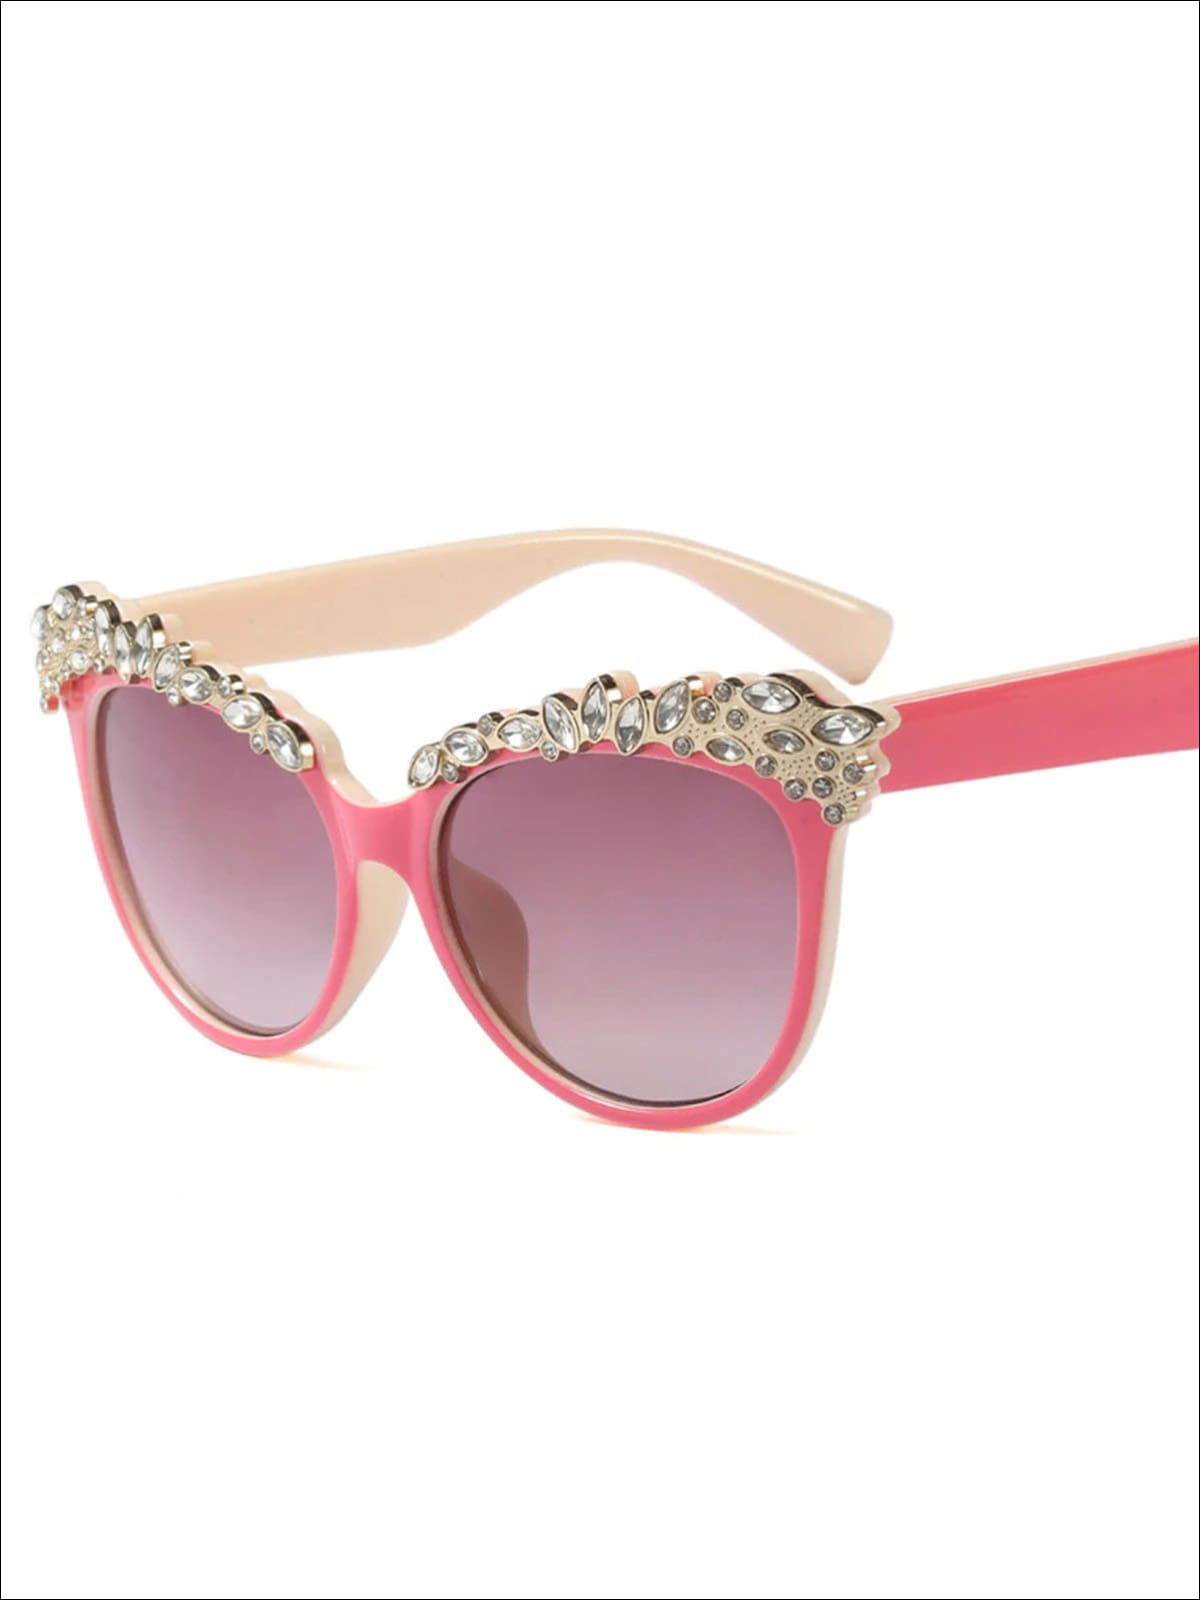 https://cdn.shopify.com/s/files/1/0996/1812/products/girls-crystal-embellished-cat-eye-sunglasses-pink-19-99-and-under-black-blue-dropified-dropshipping-accessories-mia-belle-overseas-fulfillment-baby_973.jpg?v=1577989552